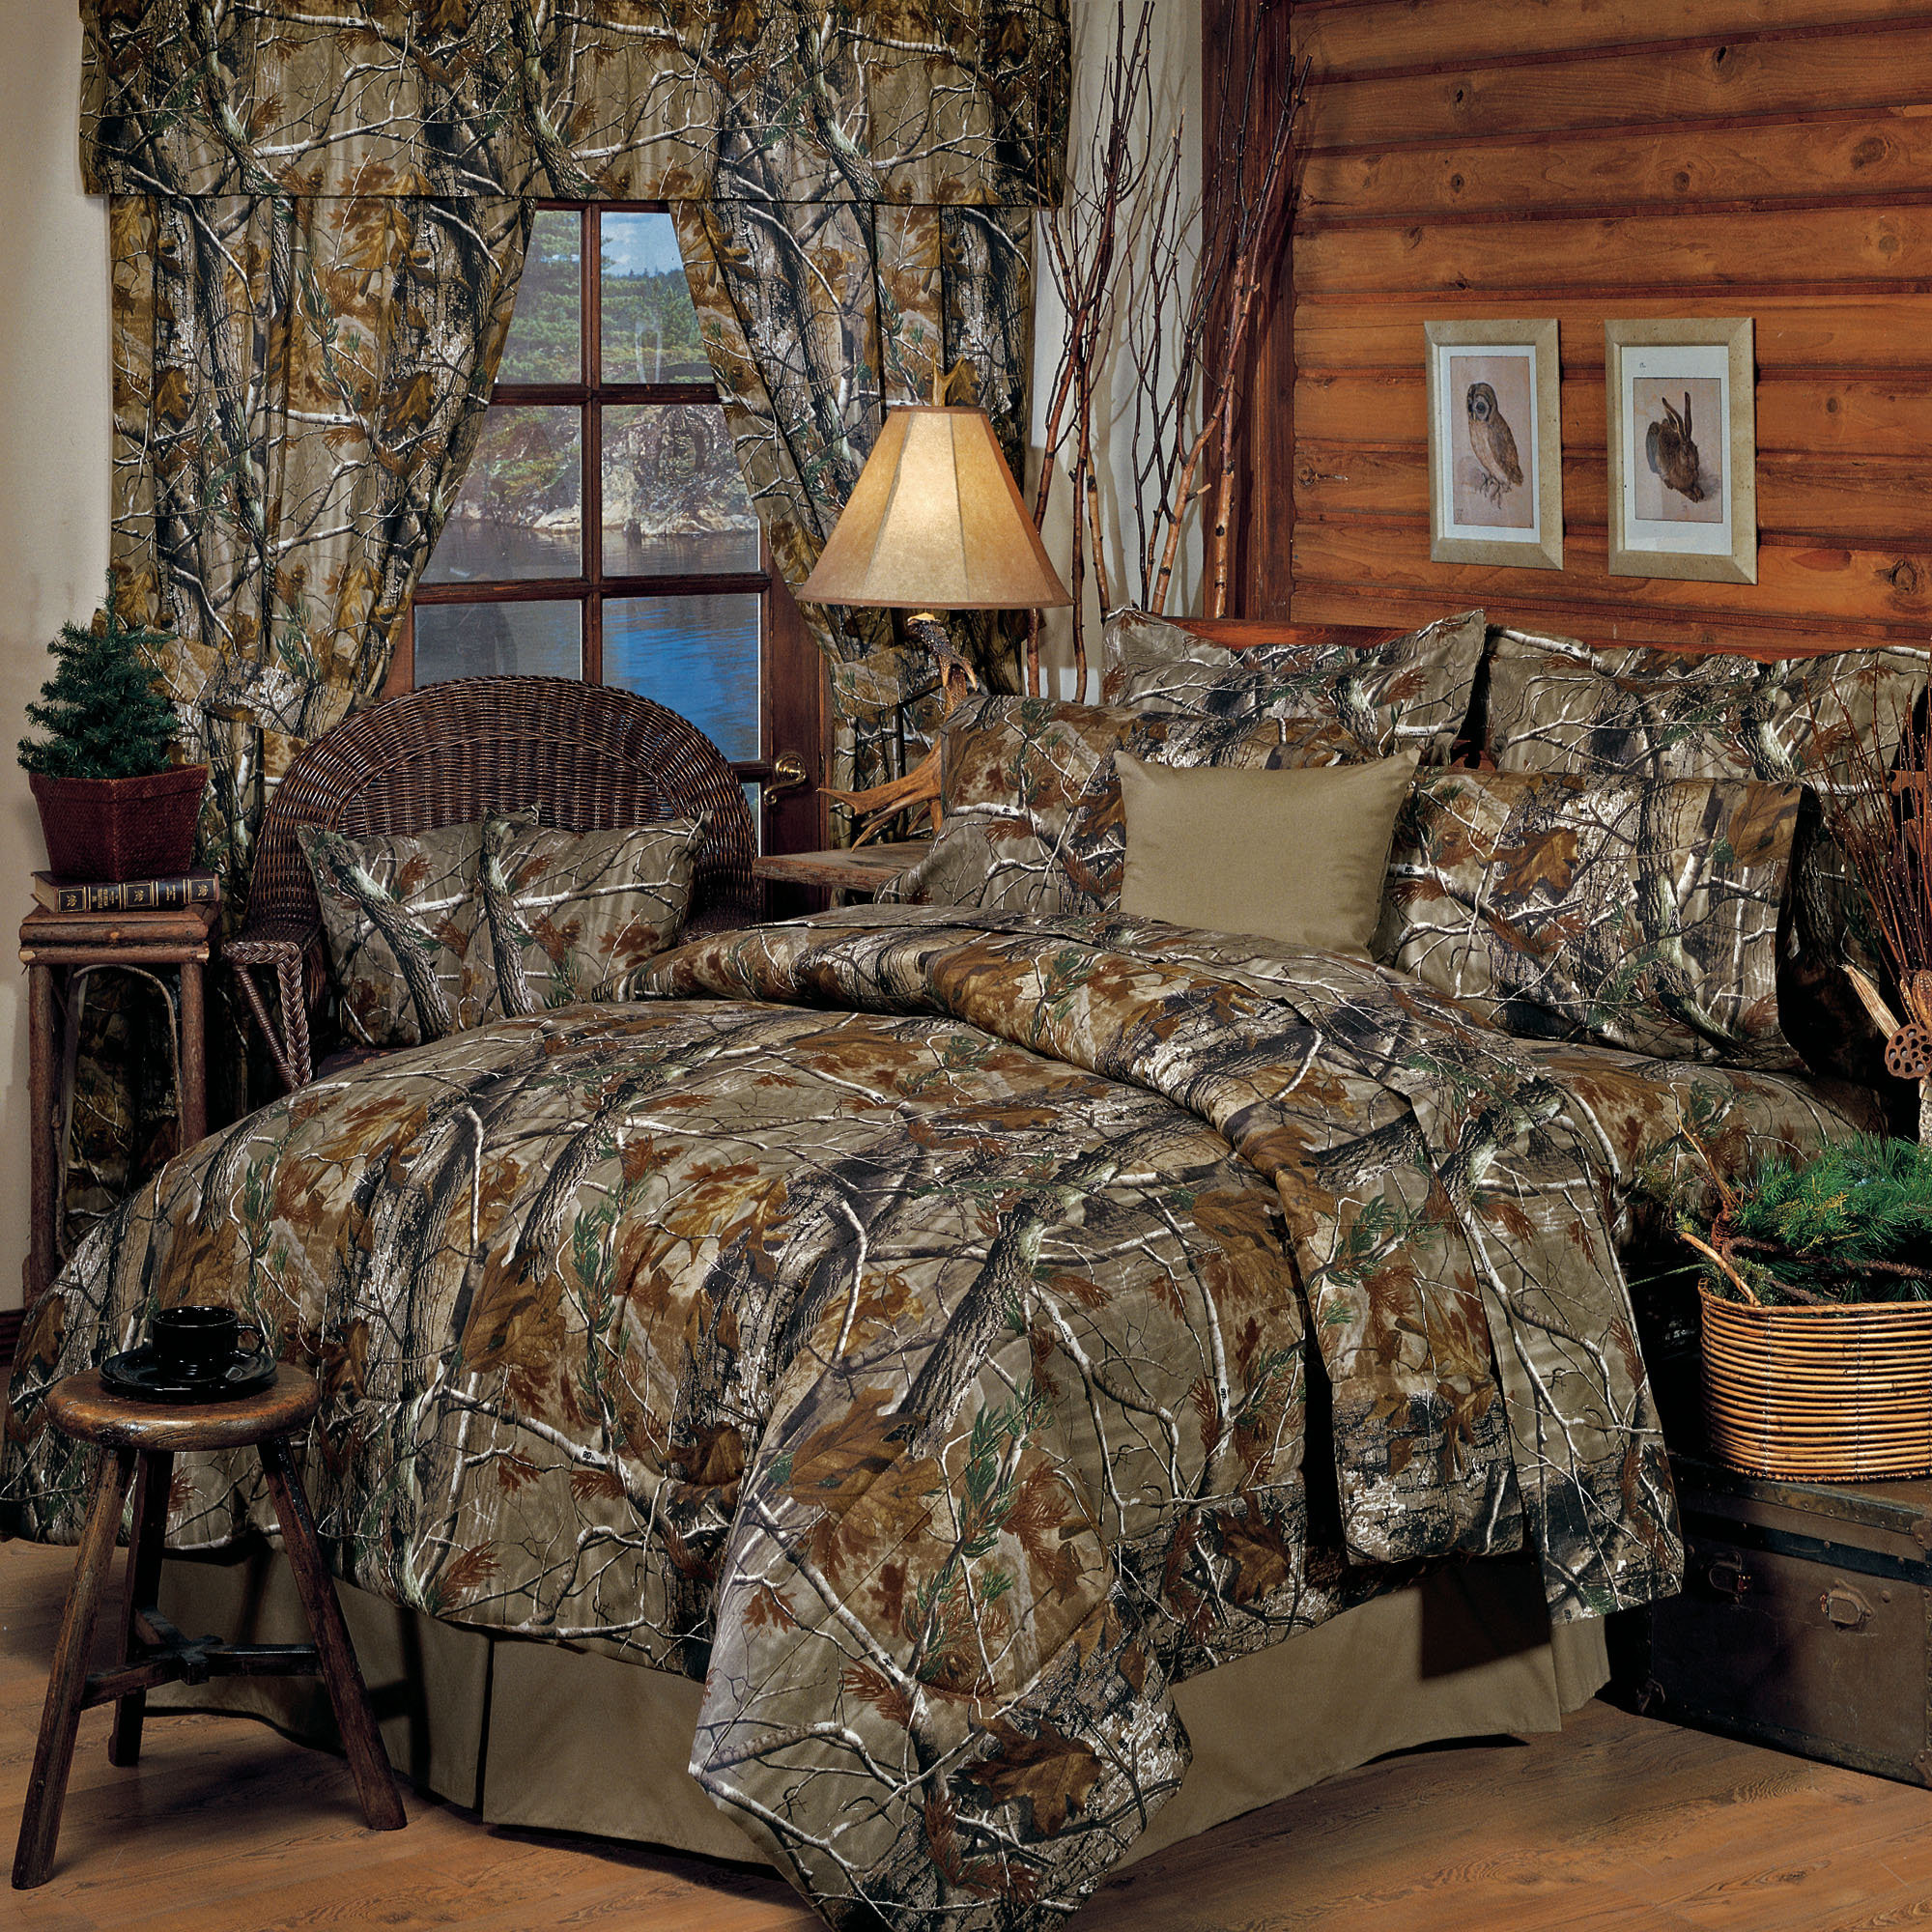 2000x2000 Bedroom Decor Ideas Using Inspiring Camo Bed Sets Design : Beautiful Camo  Bed Sets With Standing